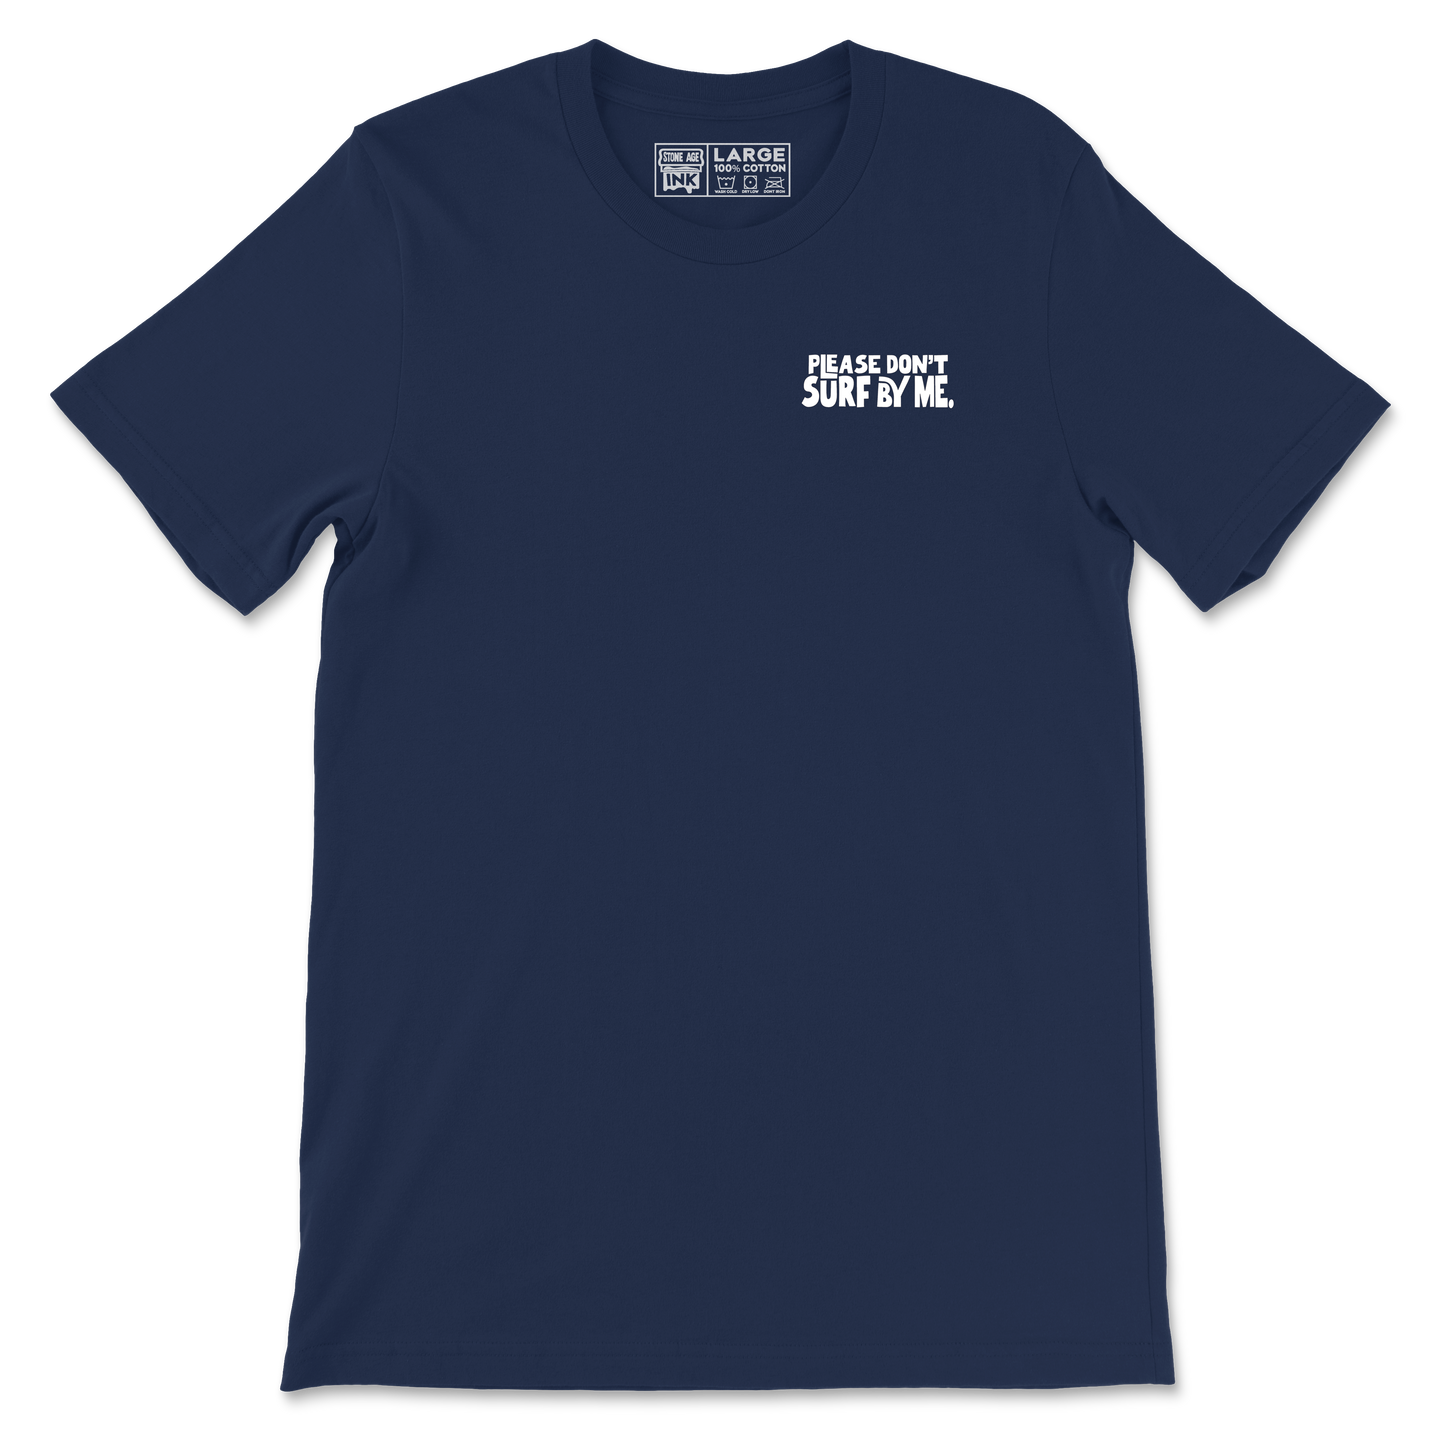 Dont surf by me T-Shirt